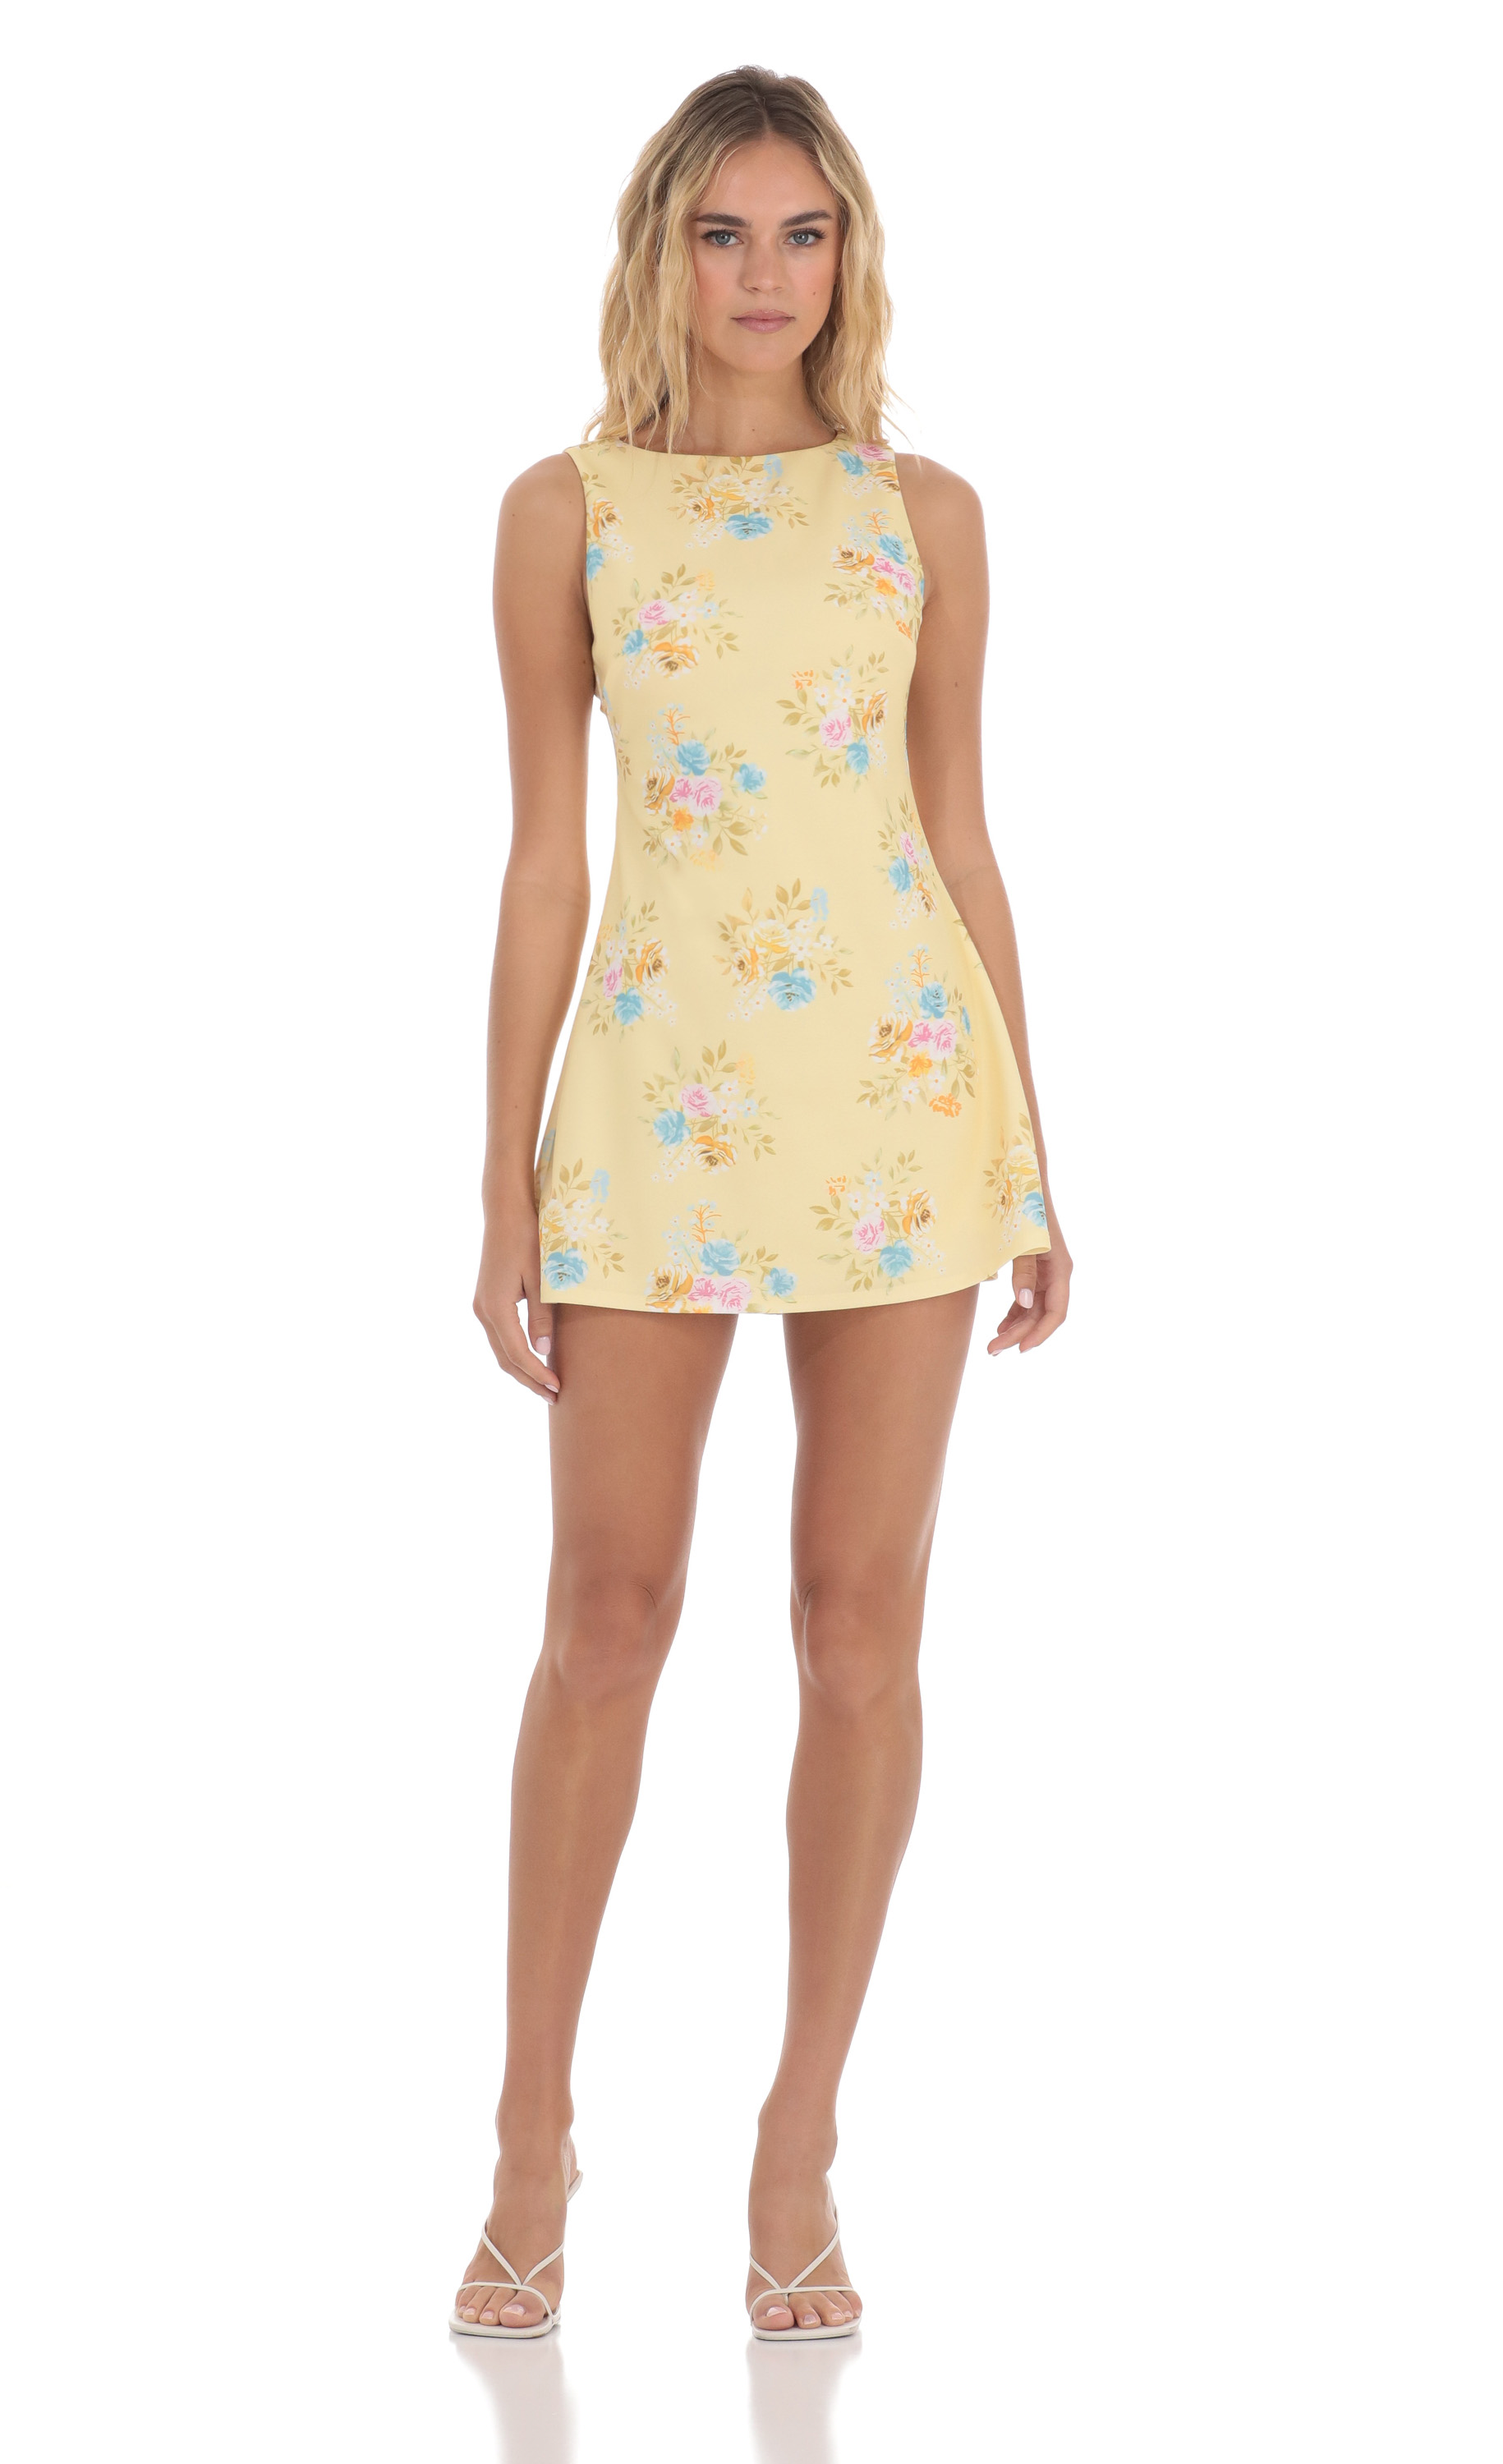 Floral High Neck Dress in Yellow